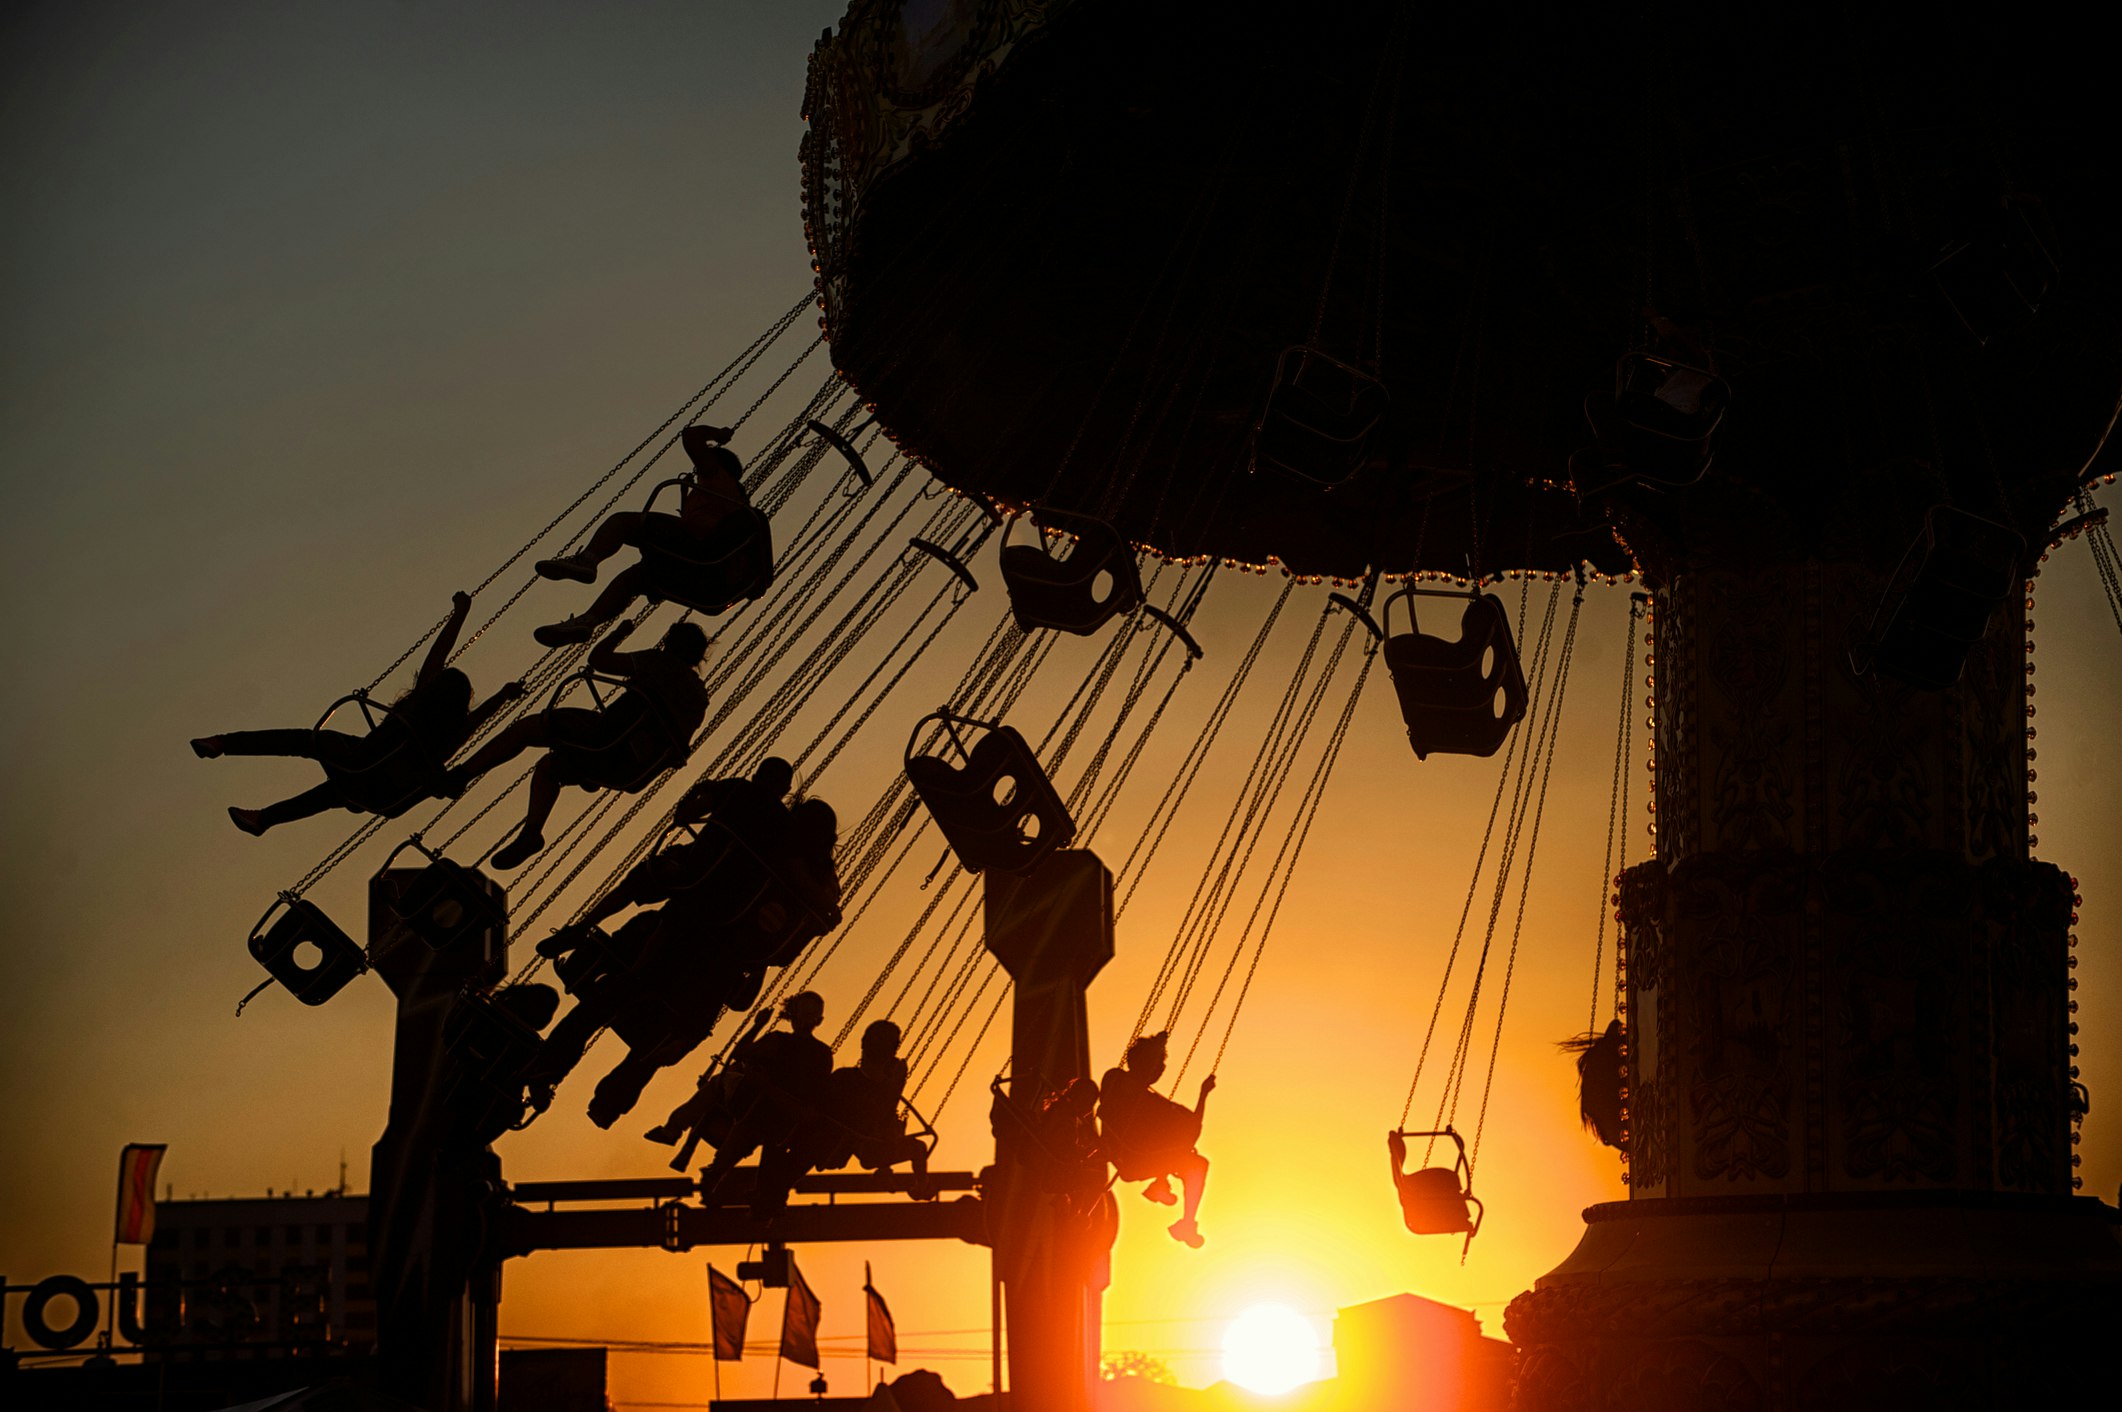 People on a swing ride at sunset at New Mexico's state fair in Albuquerque